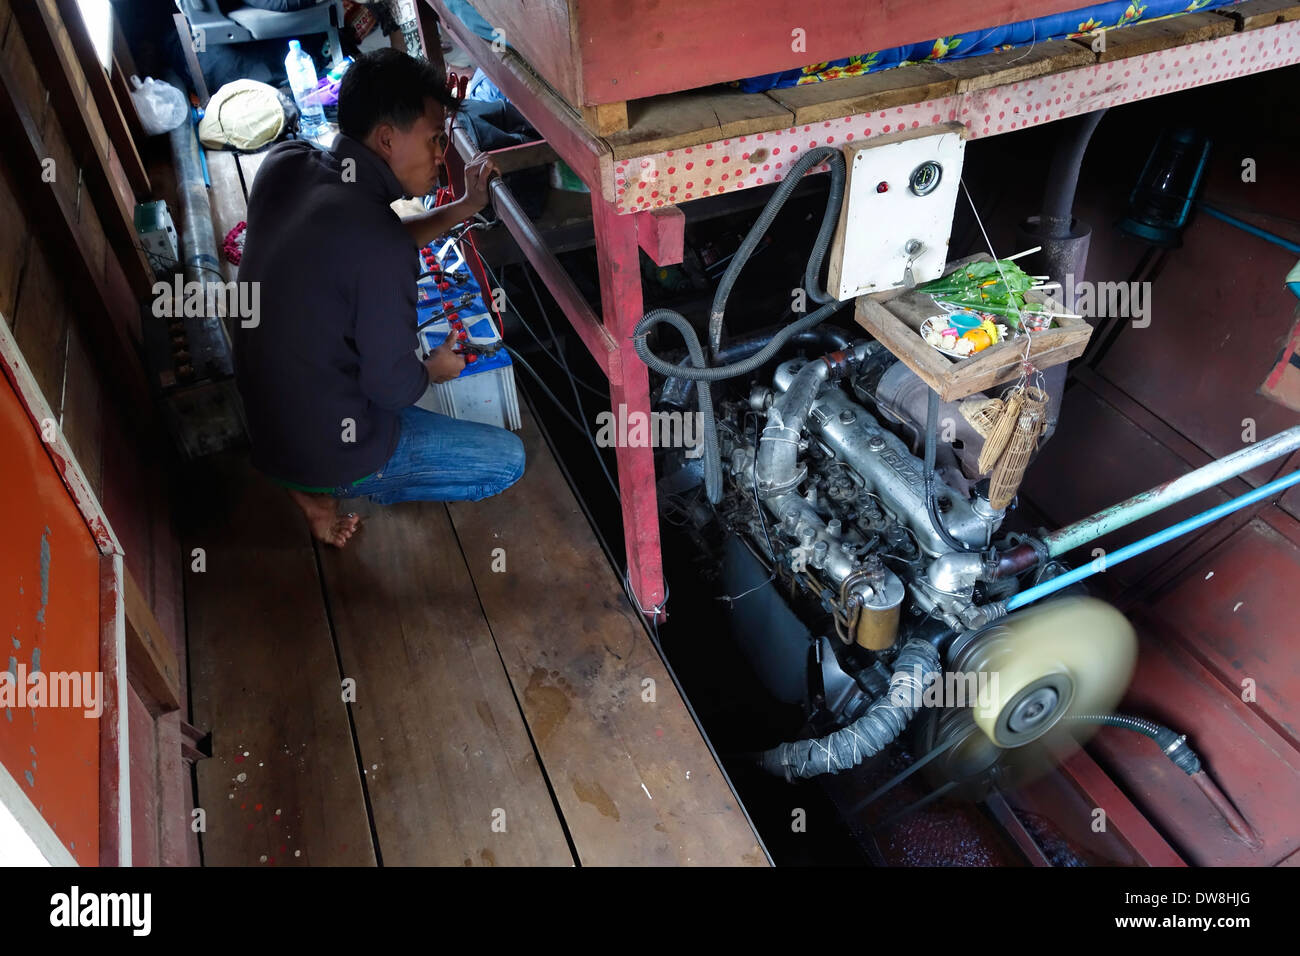 Crew member monitoring the engine of a 'slow boat' on the Mekong River in Laos. Stock Photo